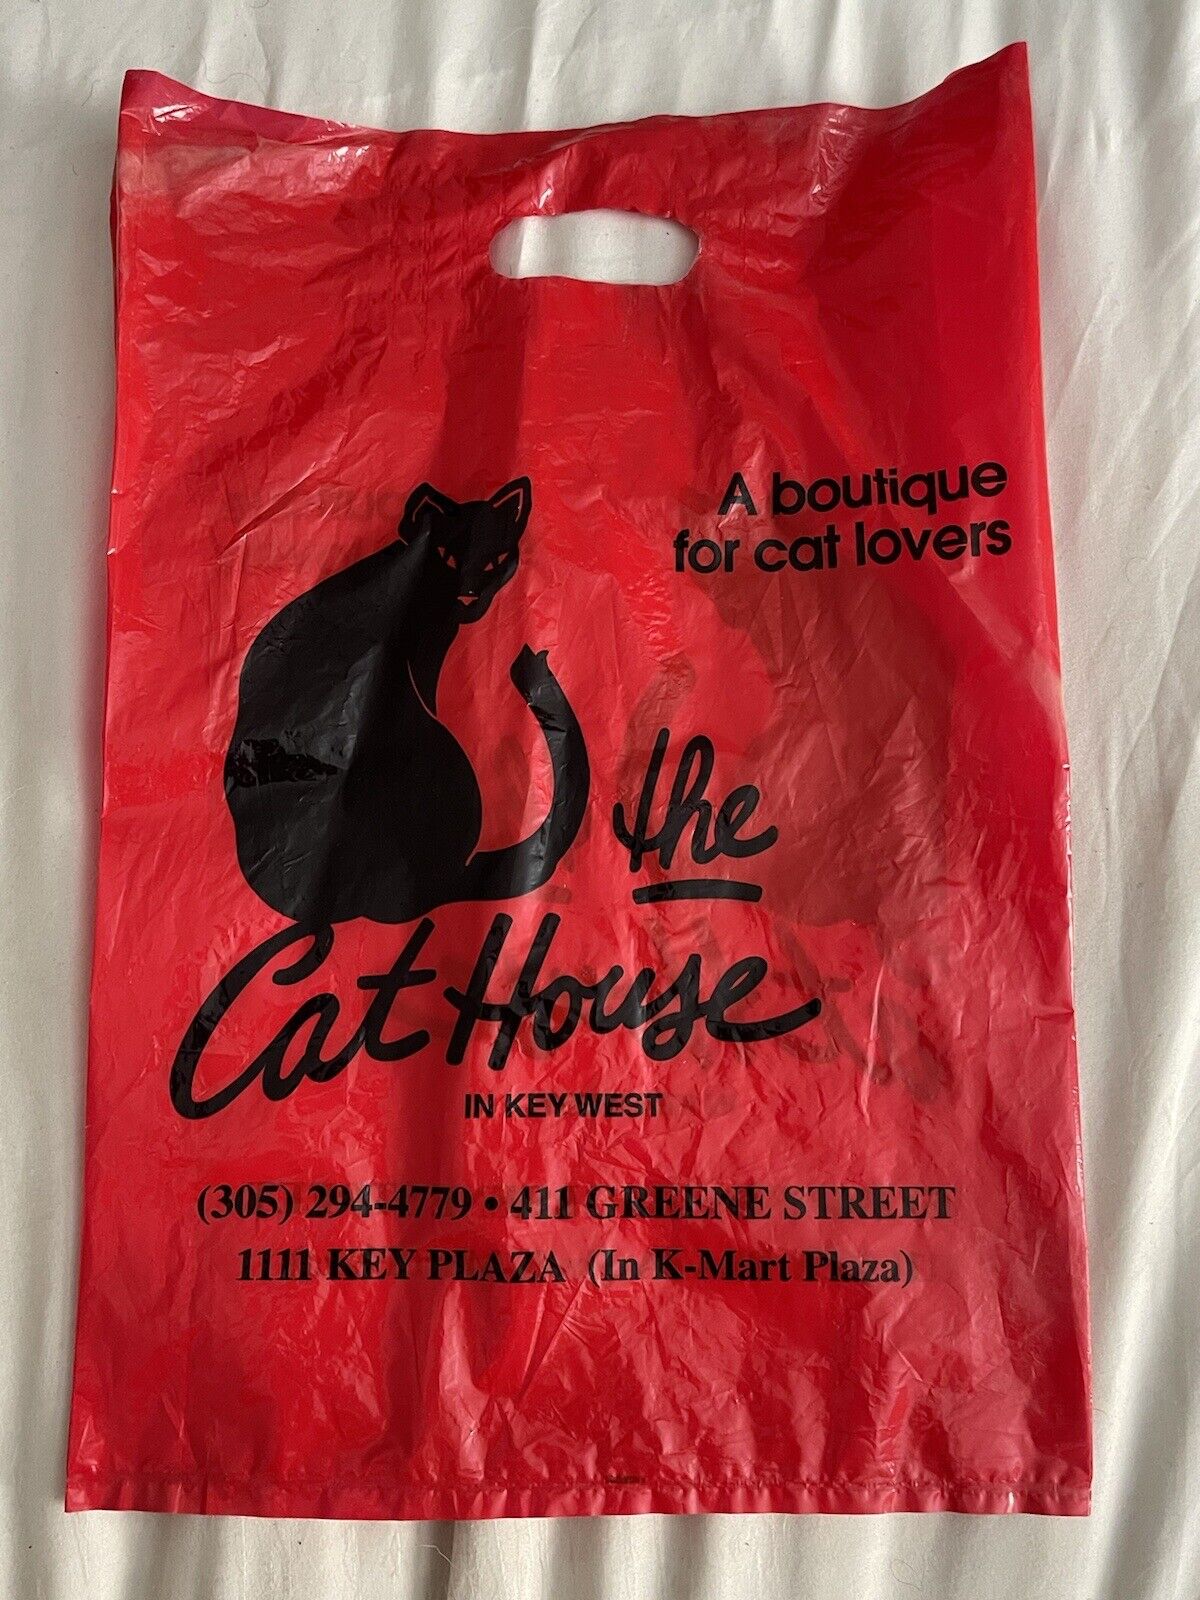 Vintage The Cat House in Key West - A Boutique for Cat Lovers - Shopping Bag